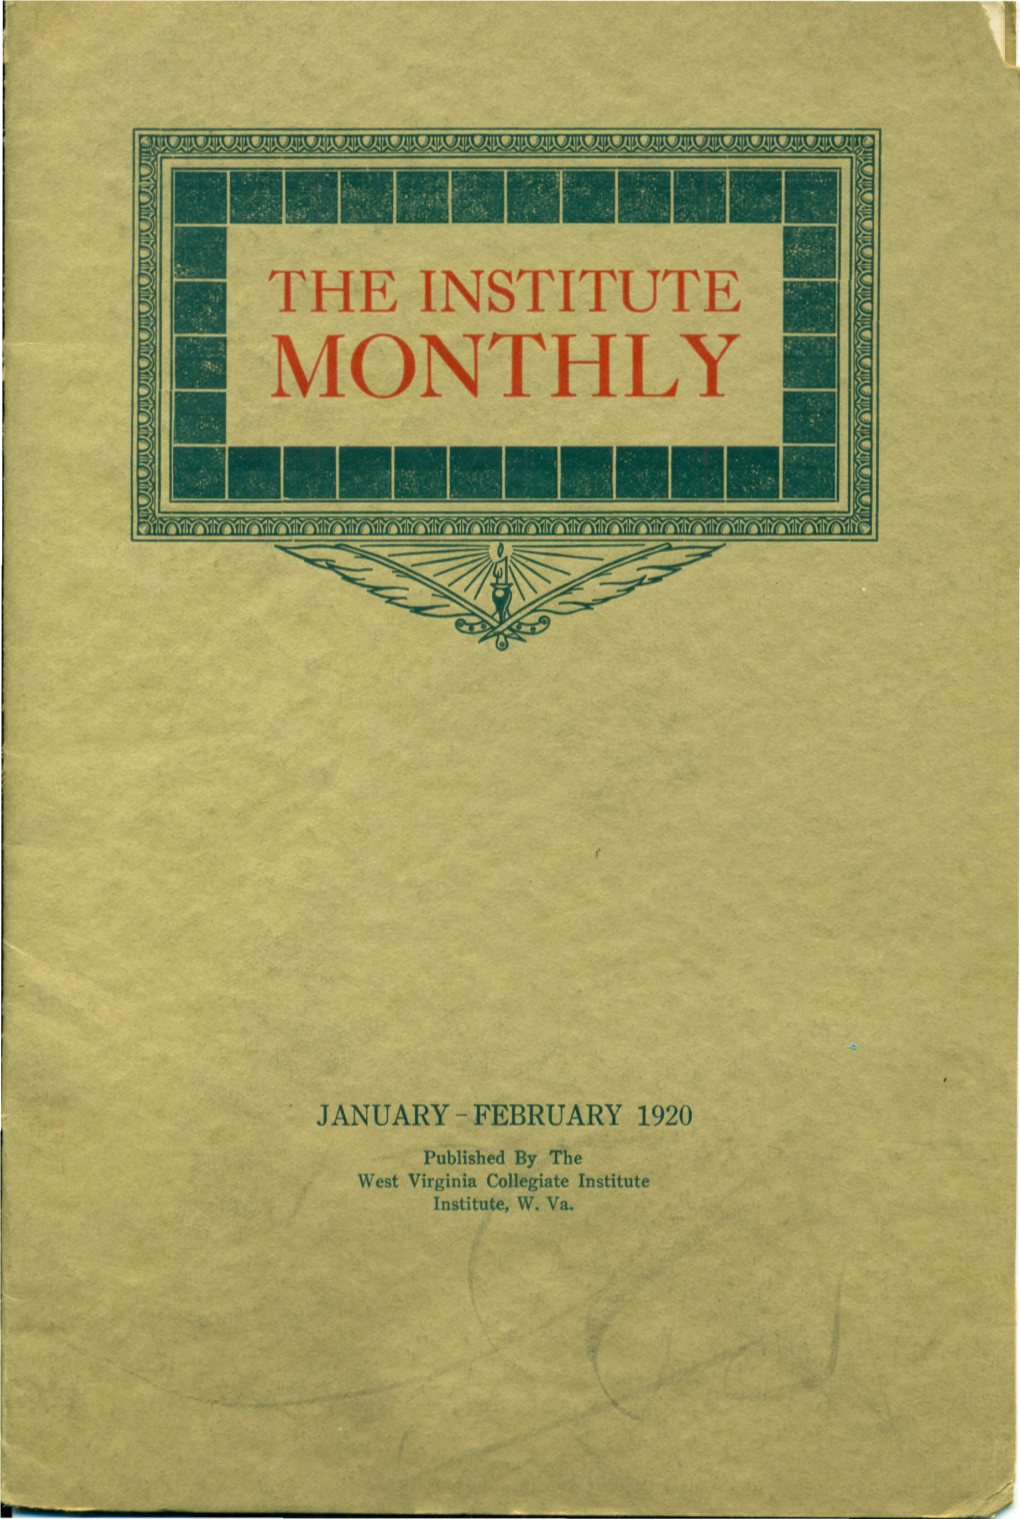 JANUARY - FEBRUARY 1920 Published by the West Virginia Collegiate Institute Institute